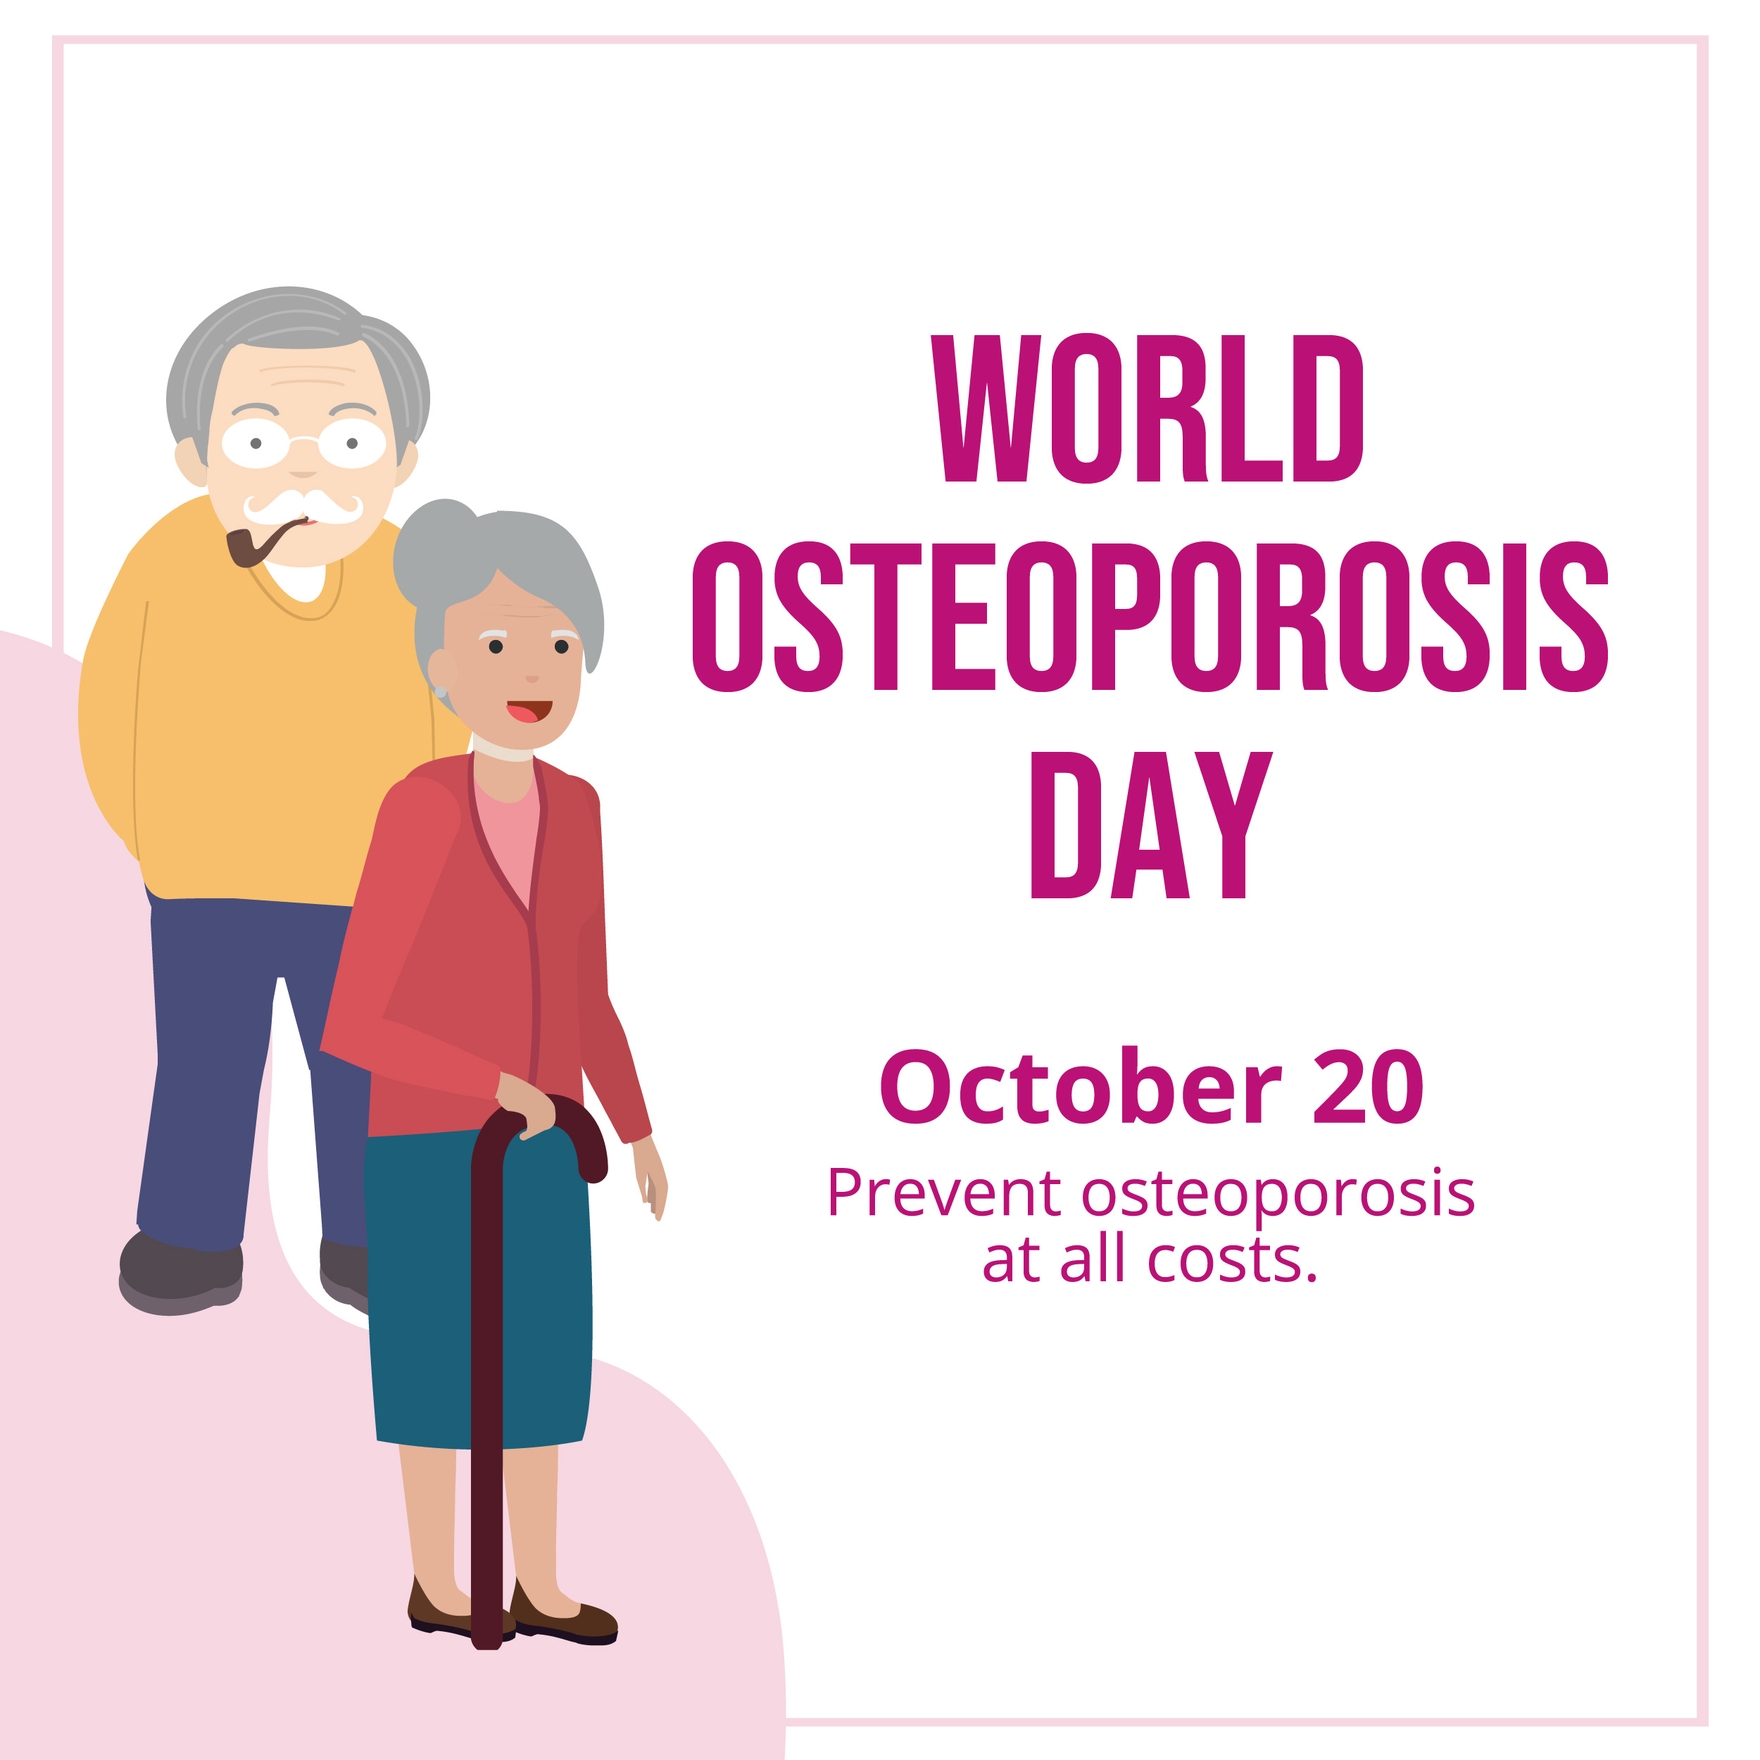 Free World Osteoporosis Day Whatsapp Post in Illustrator, PSD, EPS, SVG, JPG, PNG